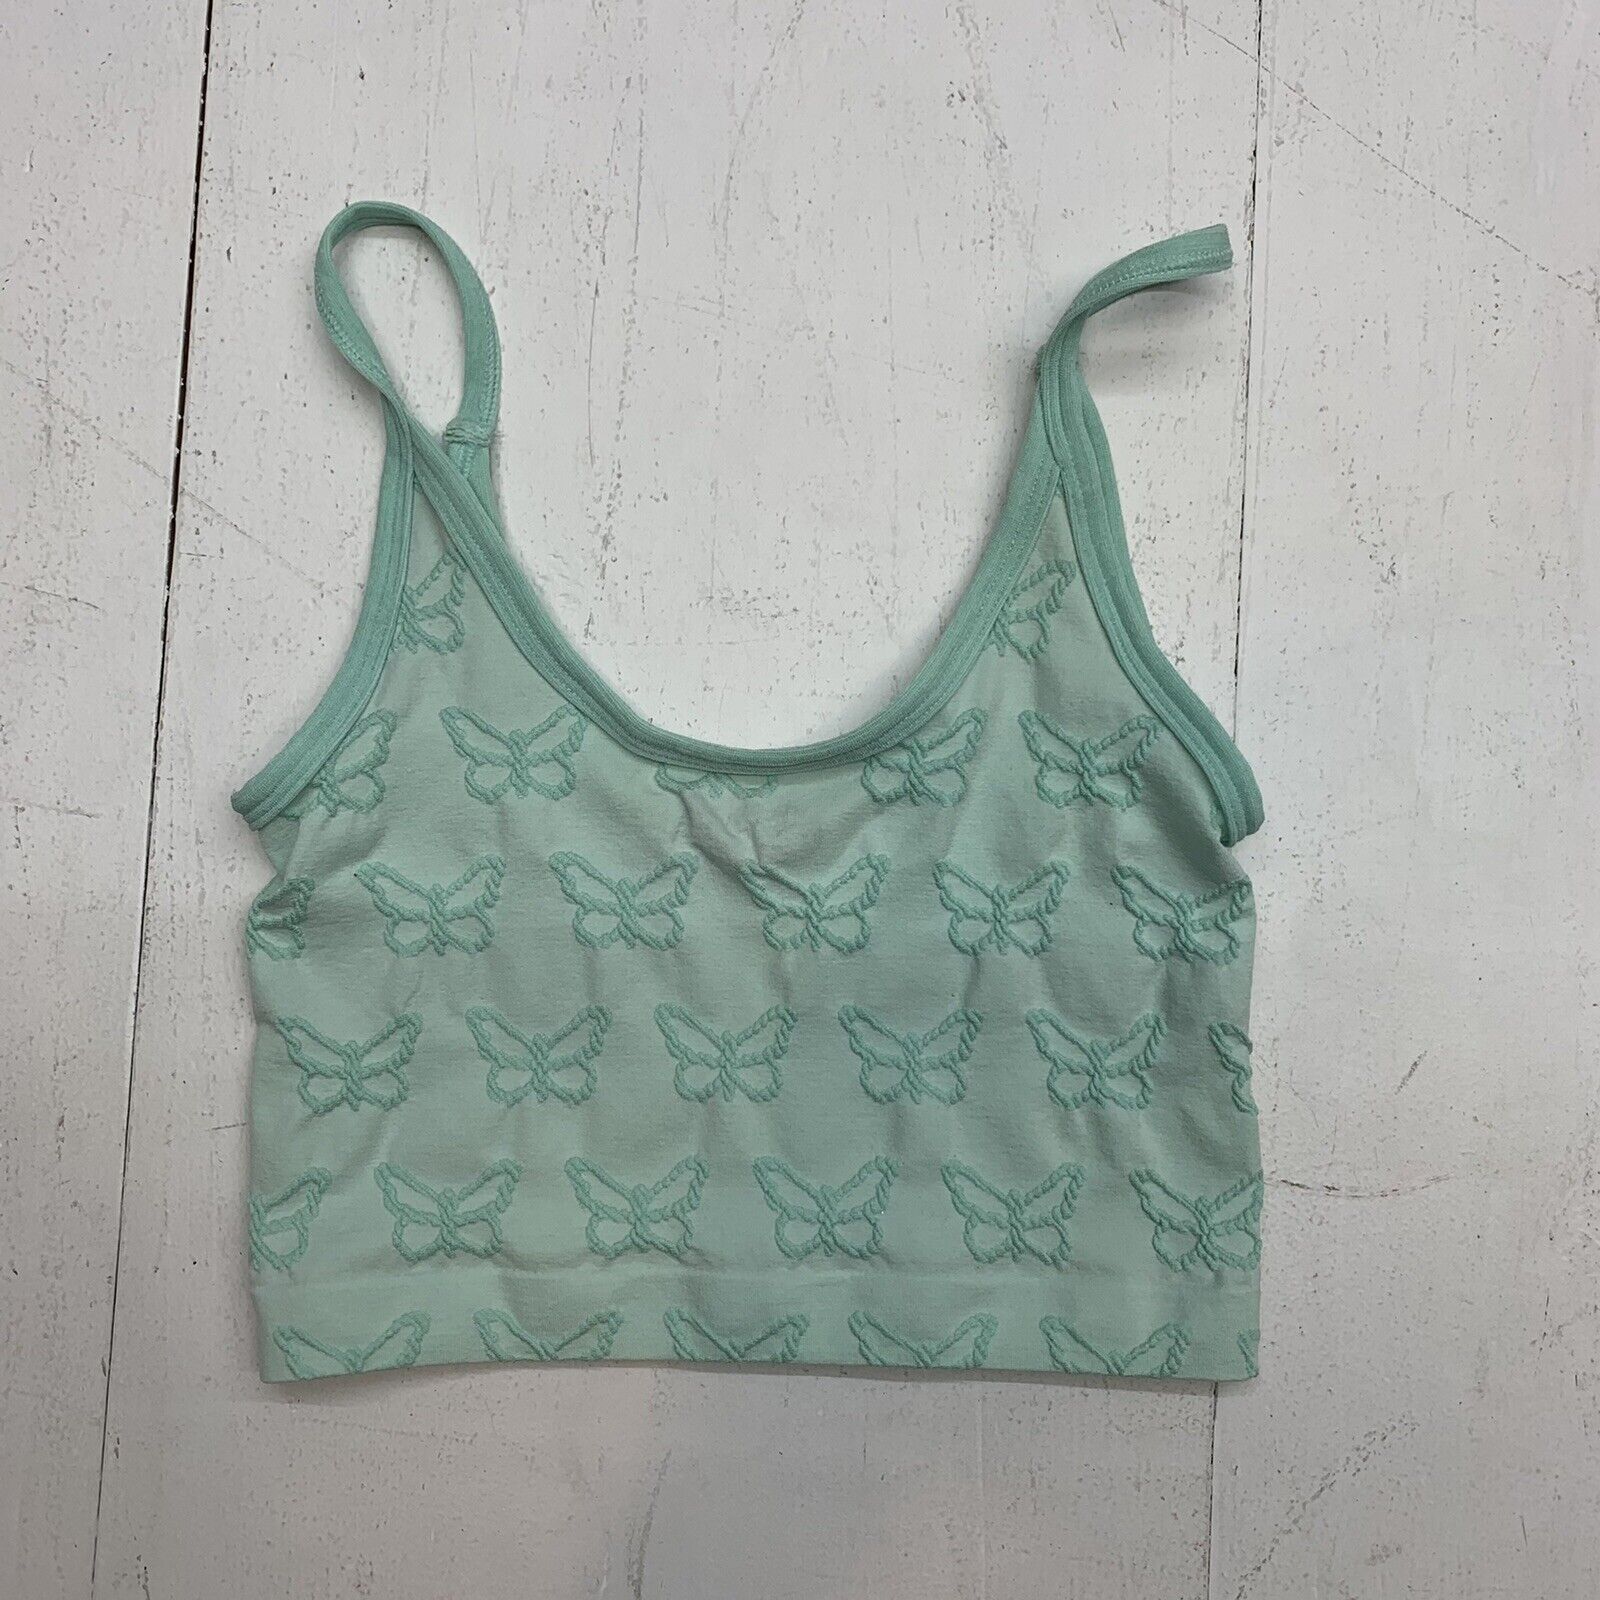 urban outfitters womens Teal butterfly bra size medium - beyond exchange